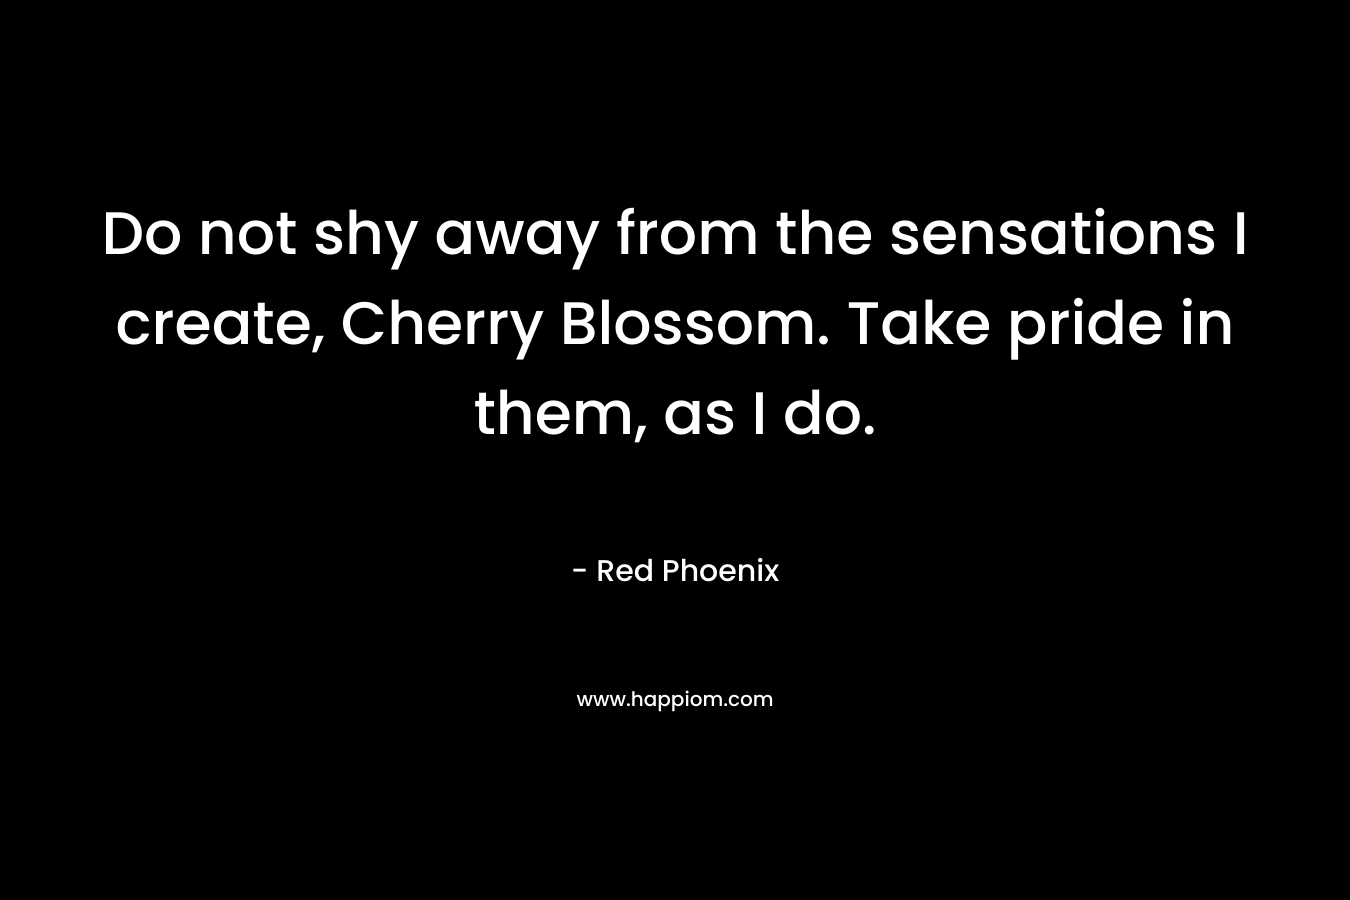 Do not shy away from the sensations I create, Cherry Blossom. Take pride in them, as I do. – Red Phoenix